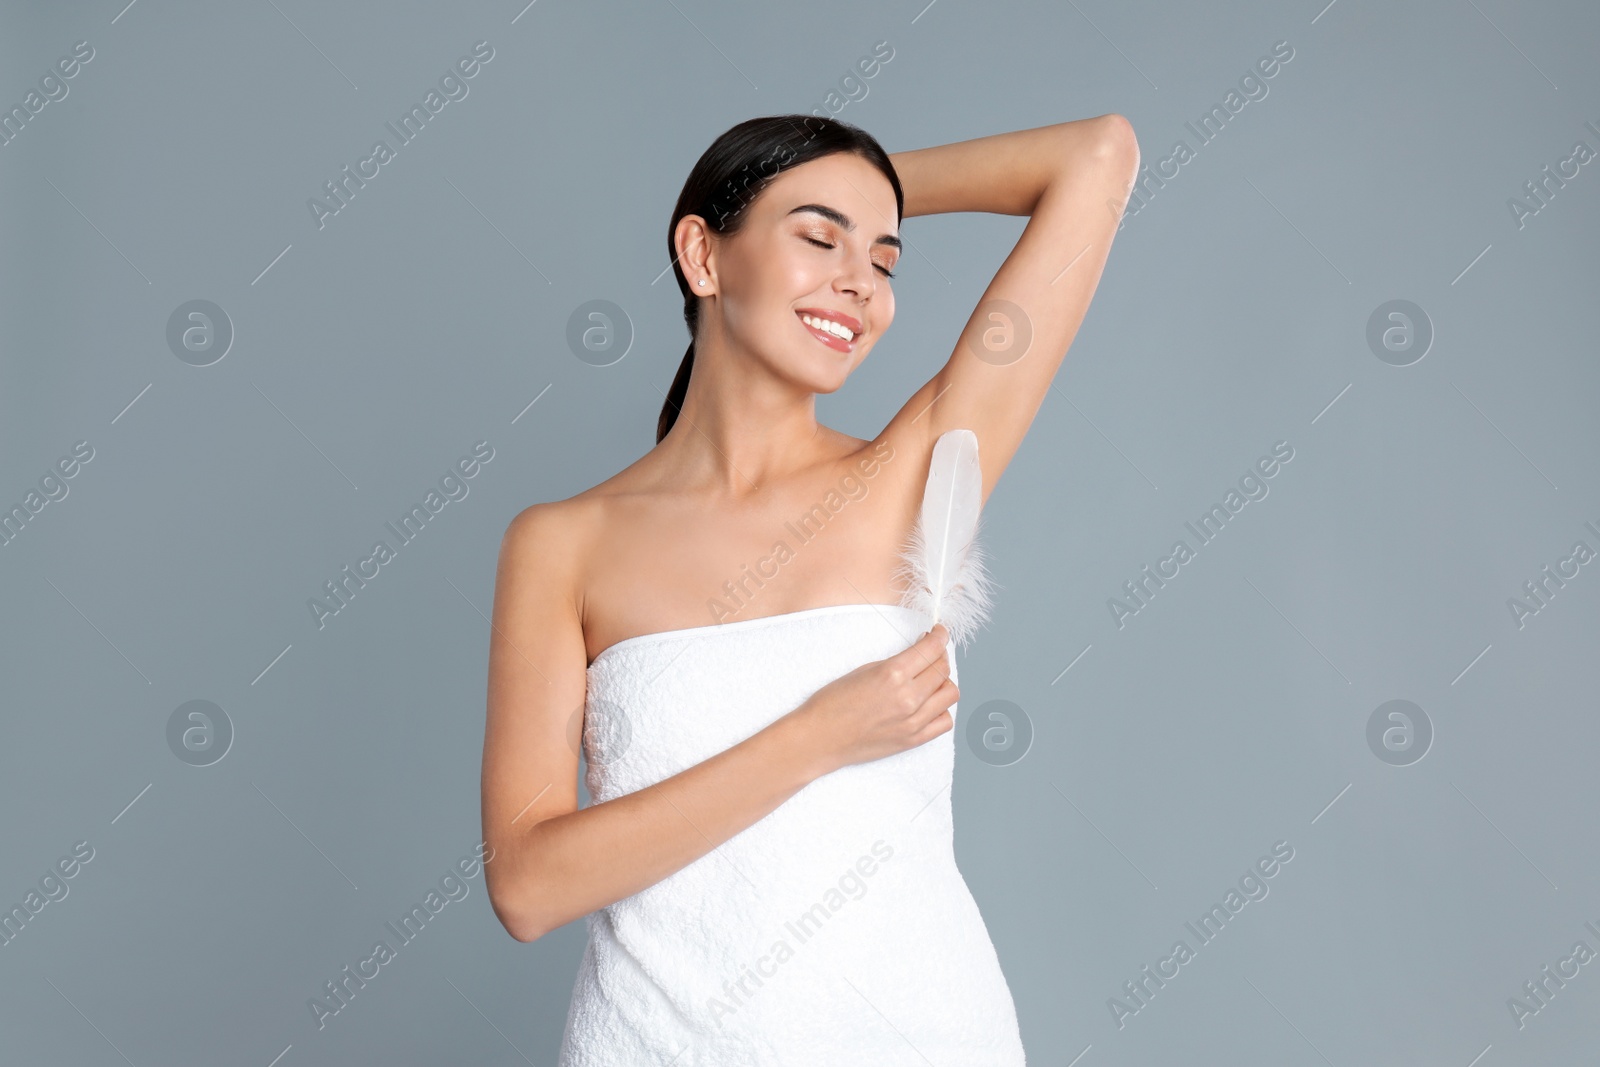 Photo of Young woman touching armpit with feather after epilation procedure on grey background